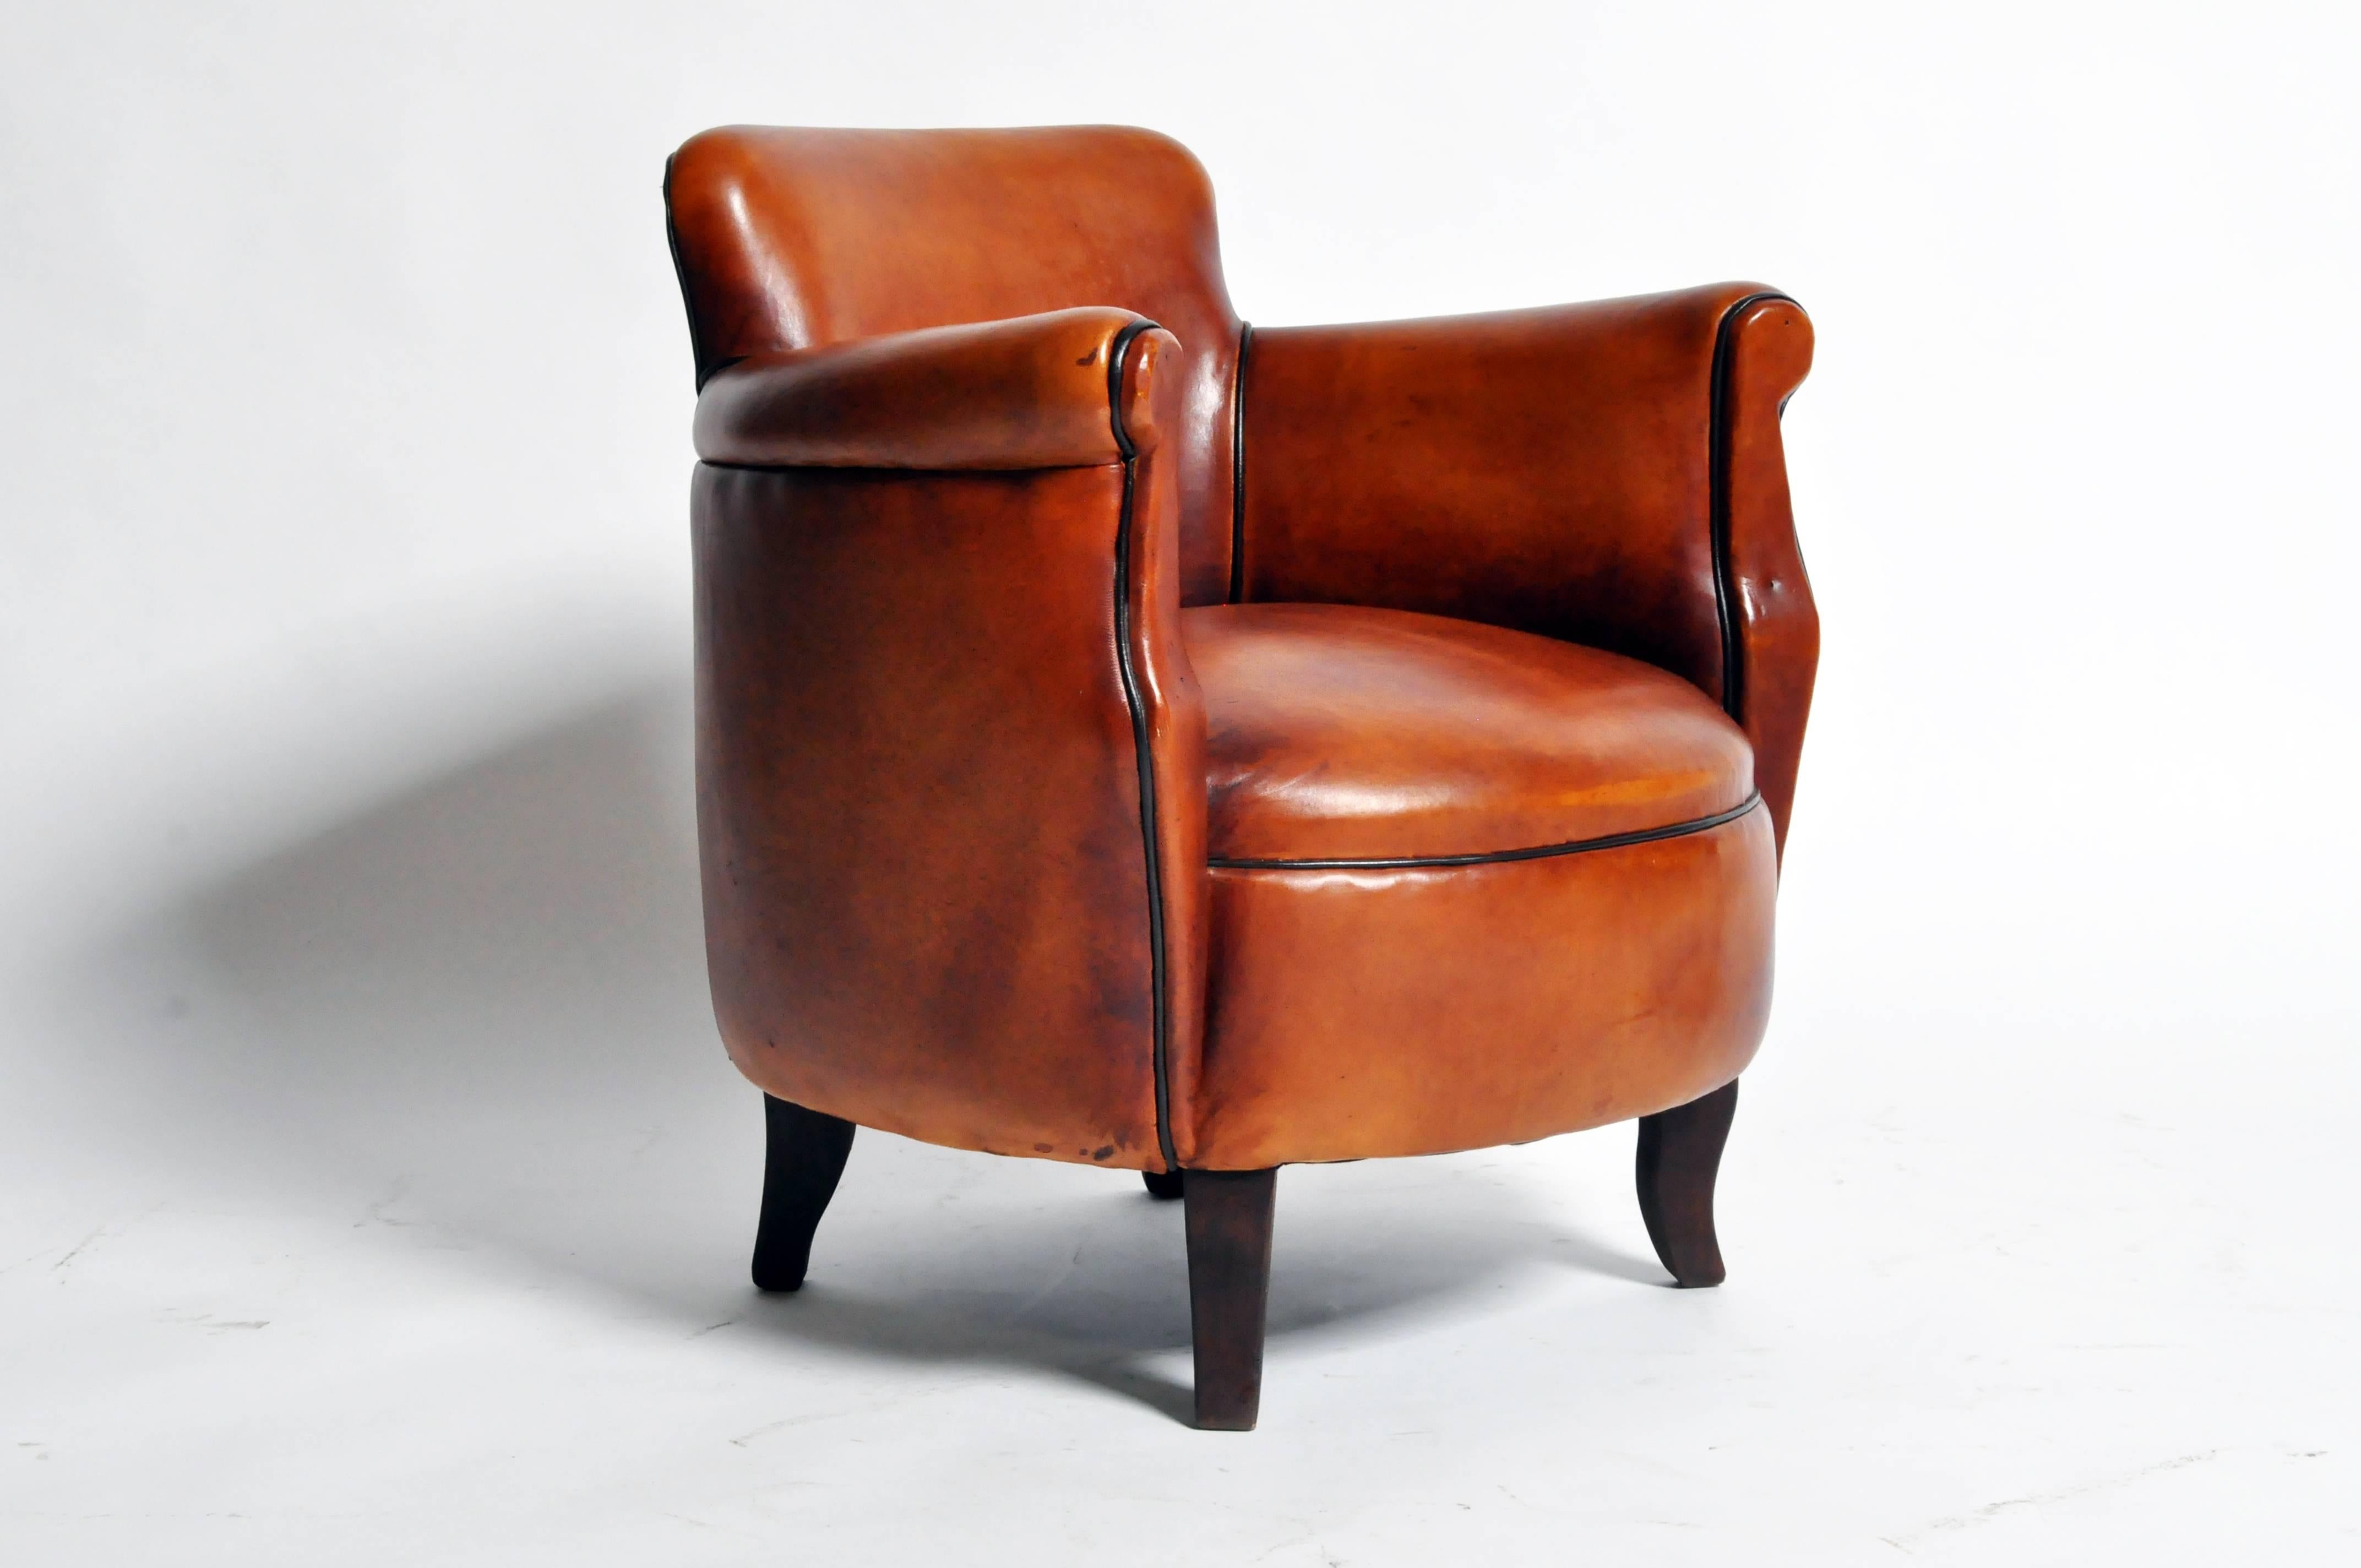 This handsome of recently made Parisian tulip brown club chair is from Paris, France and was made from leather. The chair feature a dark piping throughout.

Additional Dimensions: 18.5